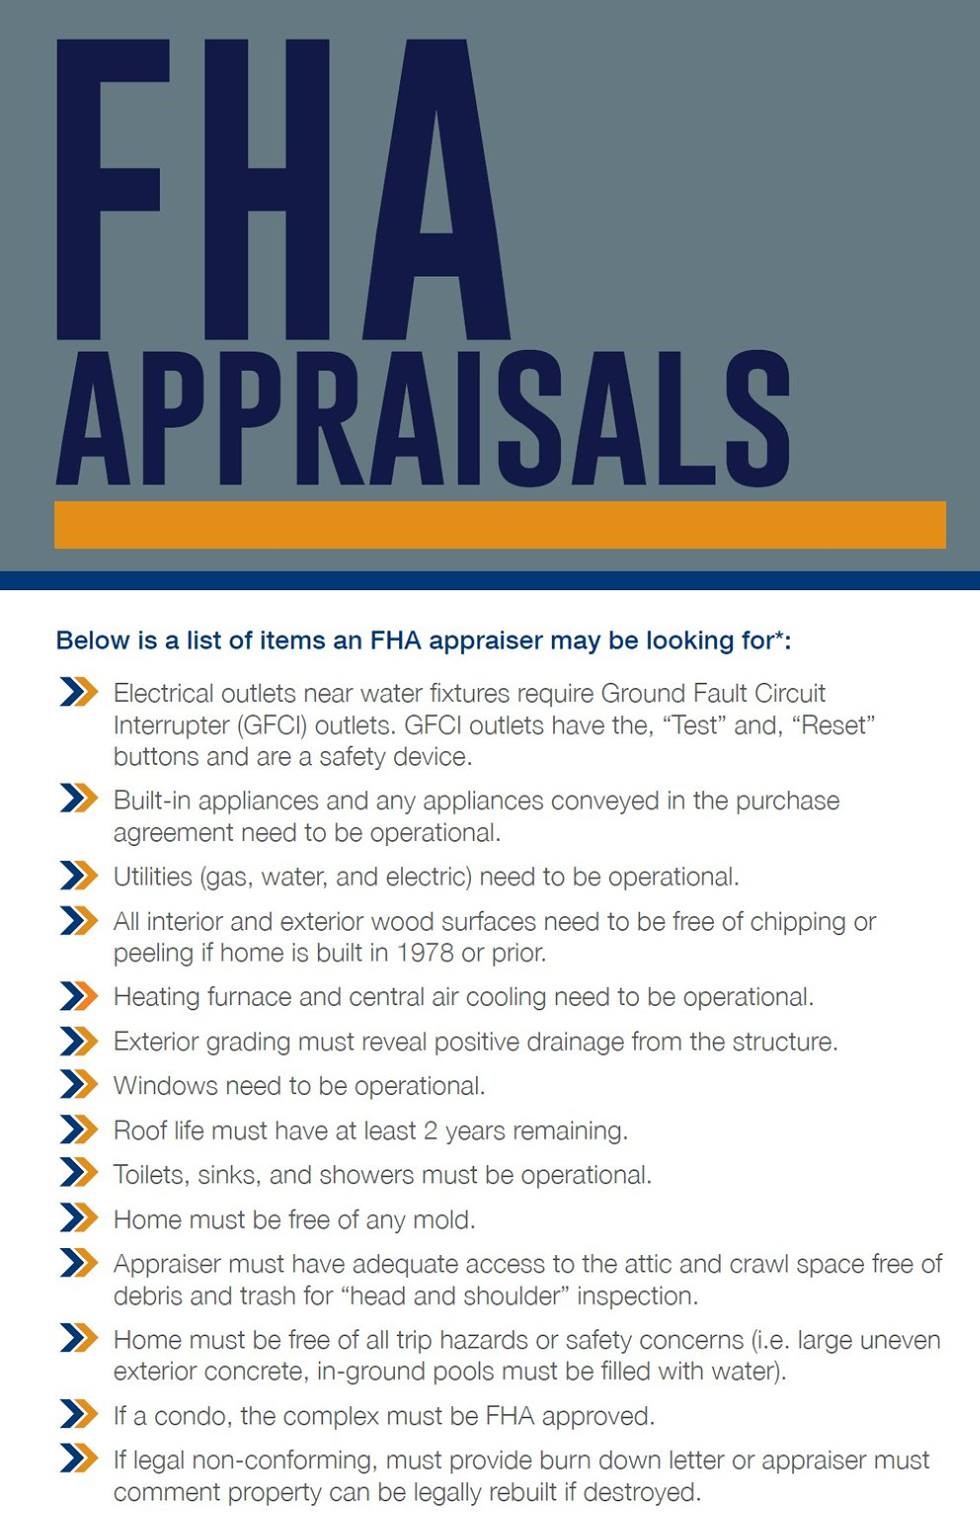 what-are-the-fha-appraisal-requirements-paperwingrvice-web-fc2